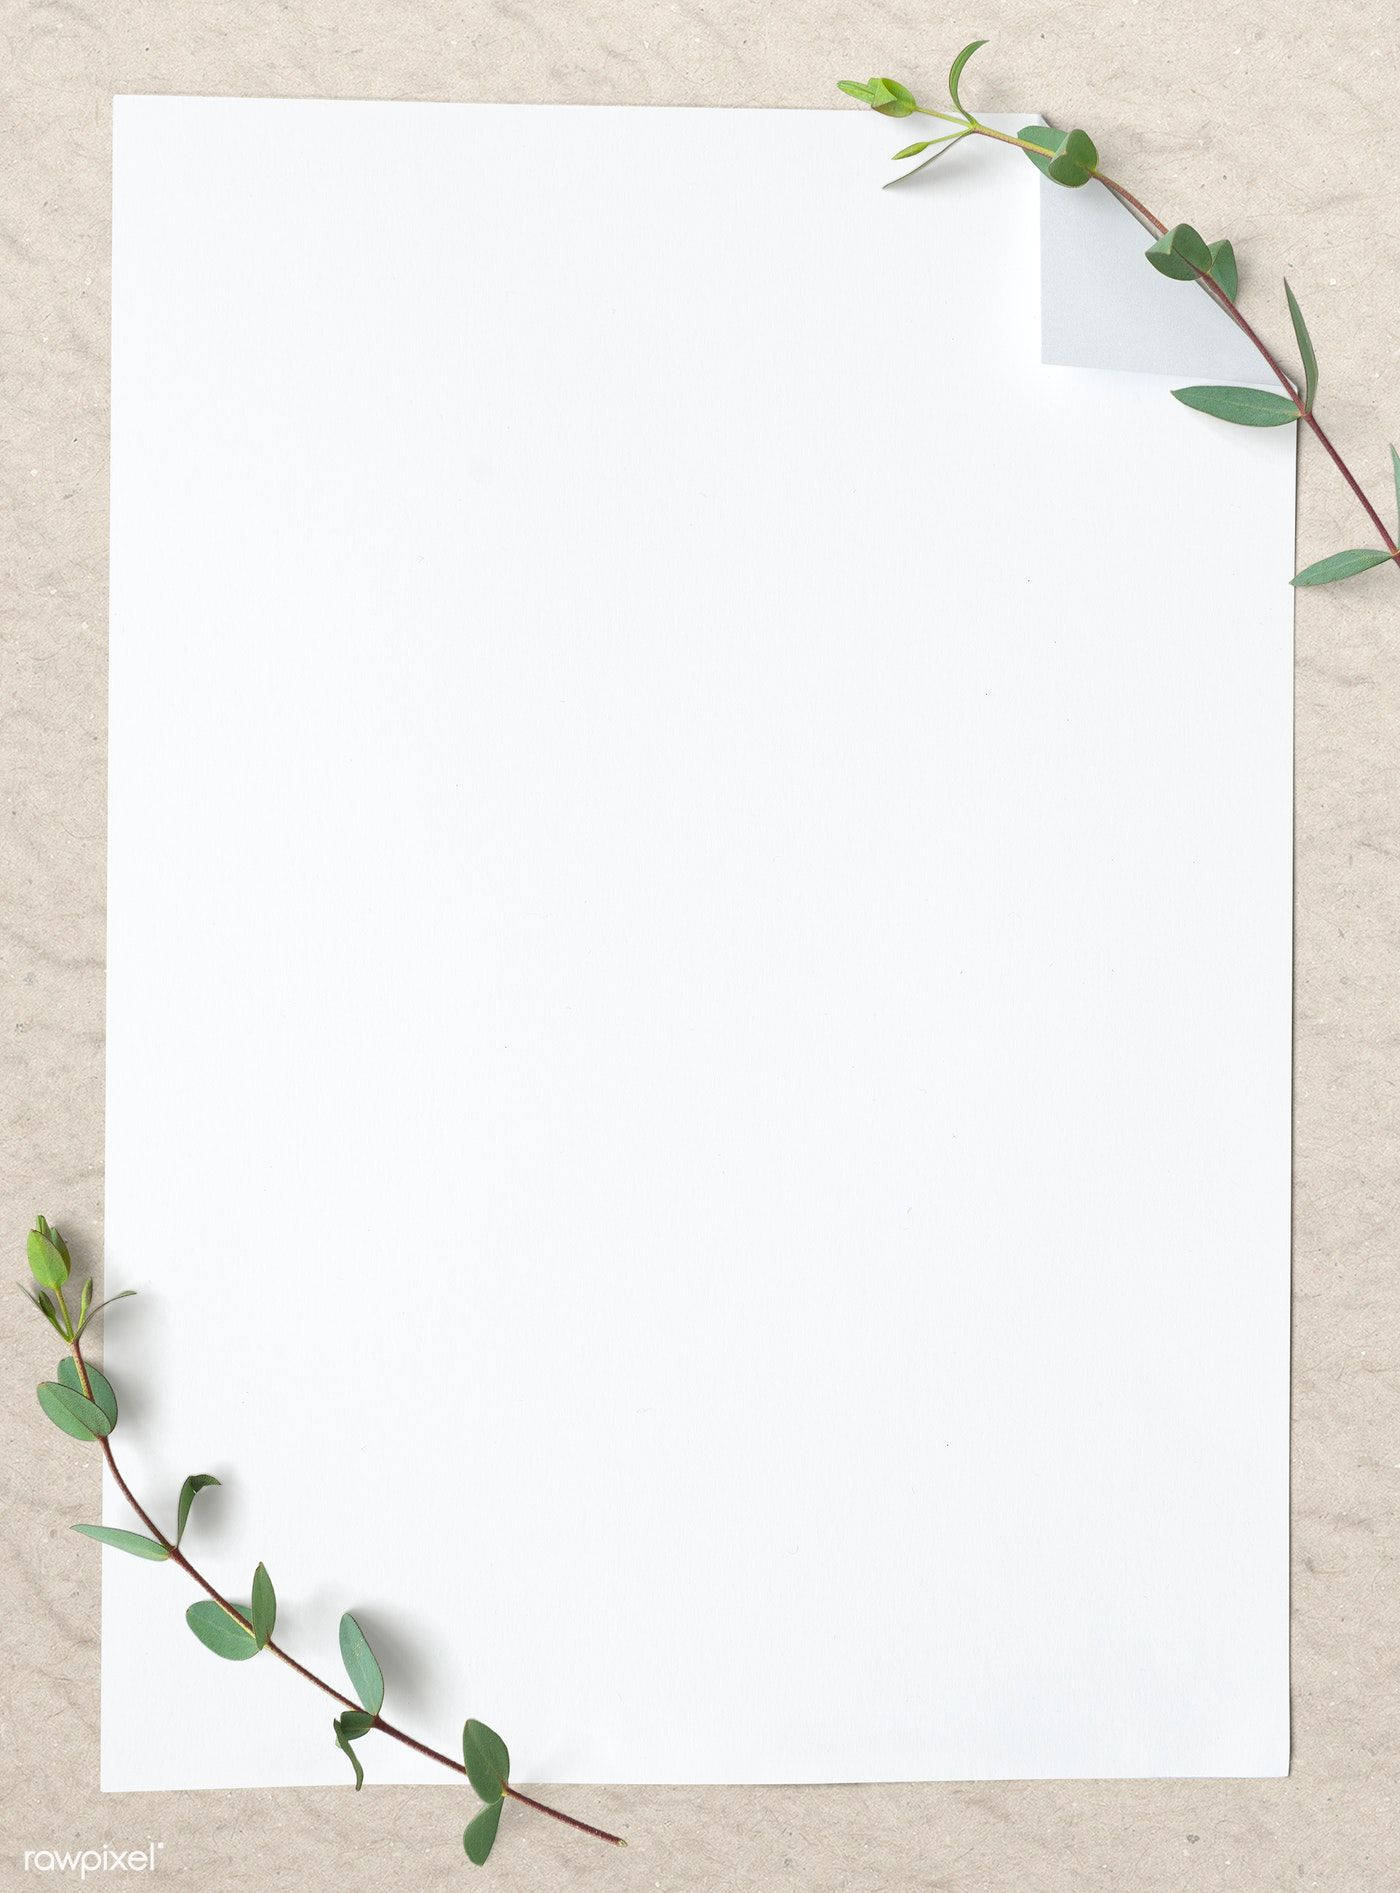 Blank Page Paper With Leaves Wallpaper